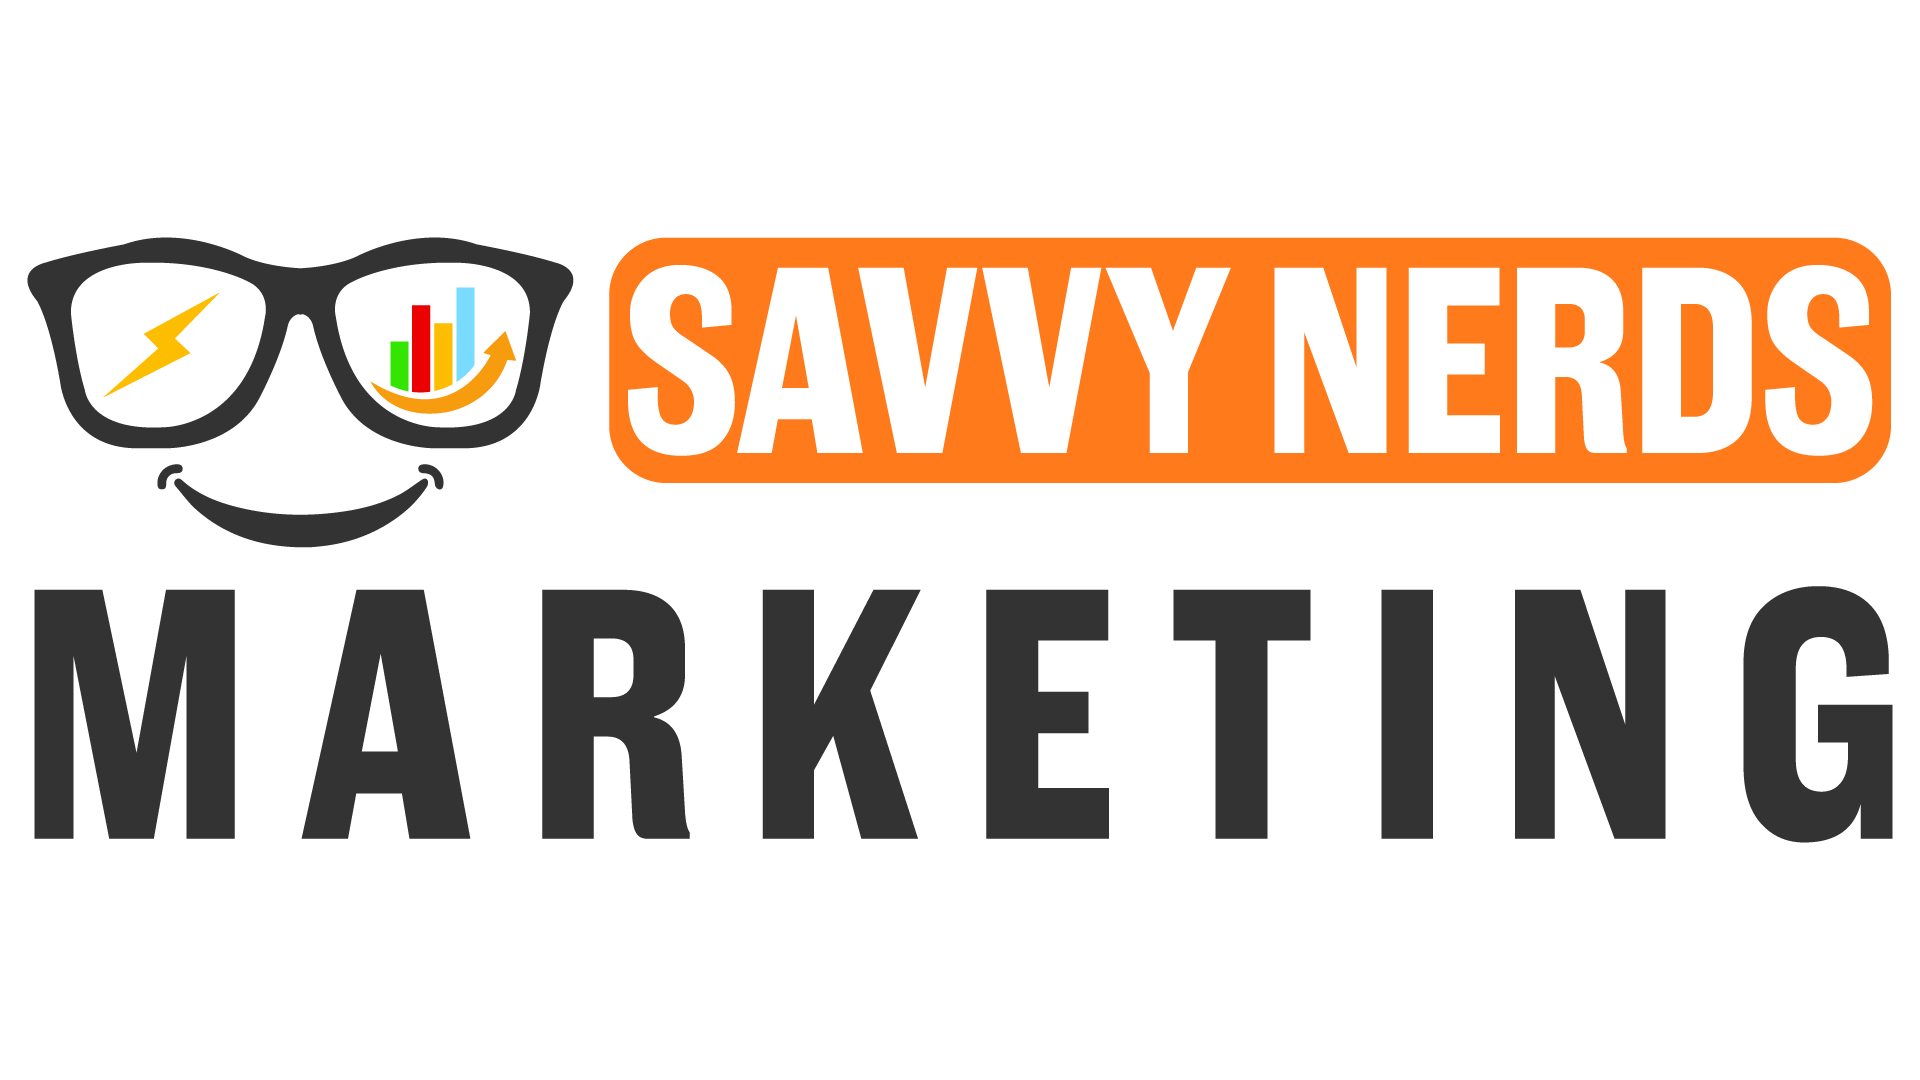 Savvy Nerds website designer and SEO company in Chicago IL logo